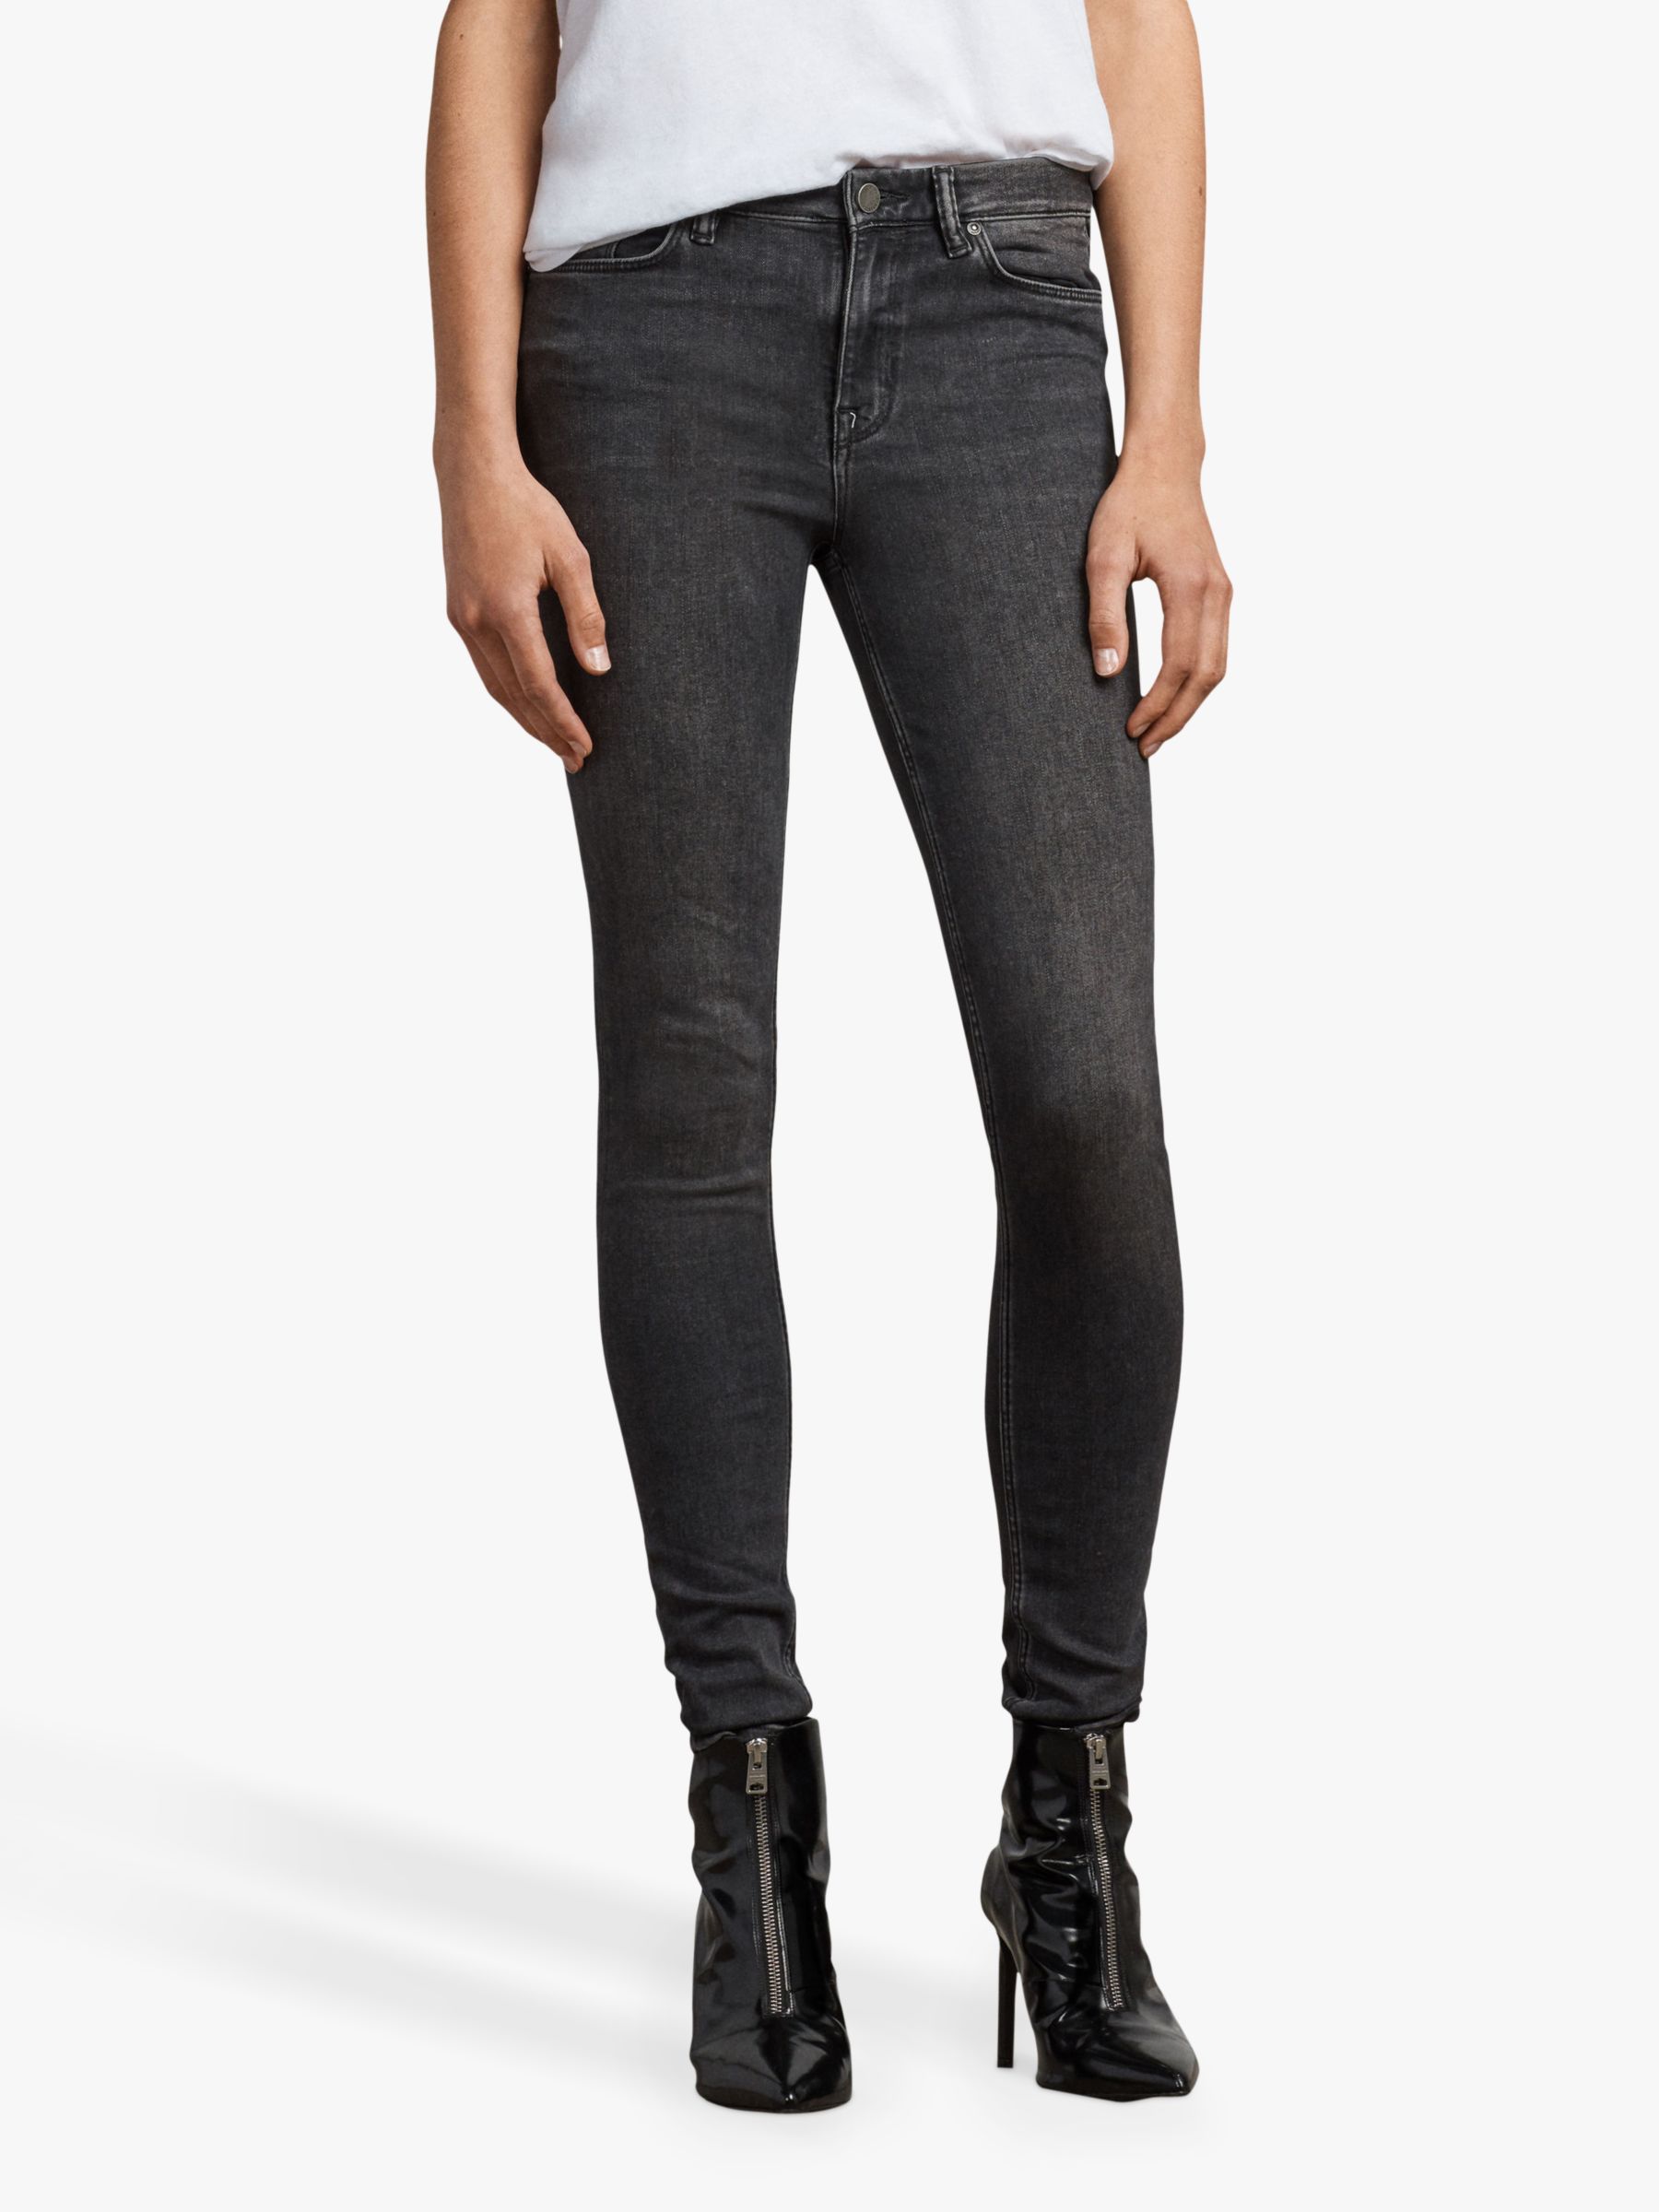 washed black skinny jeans womens